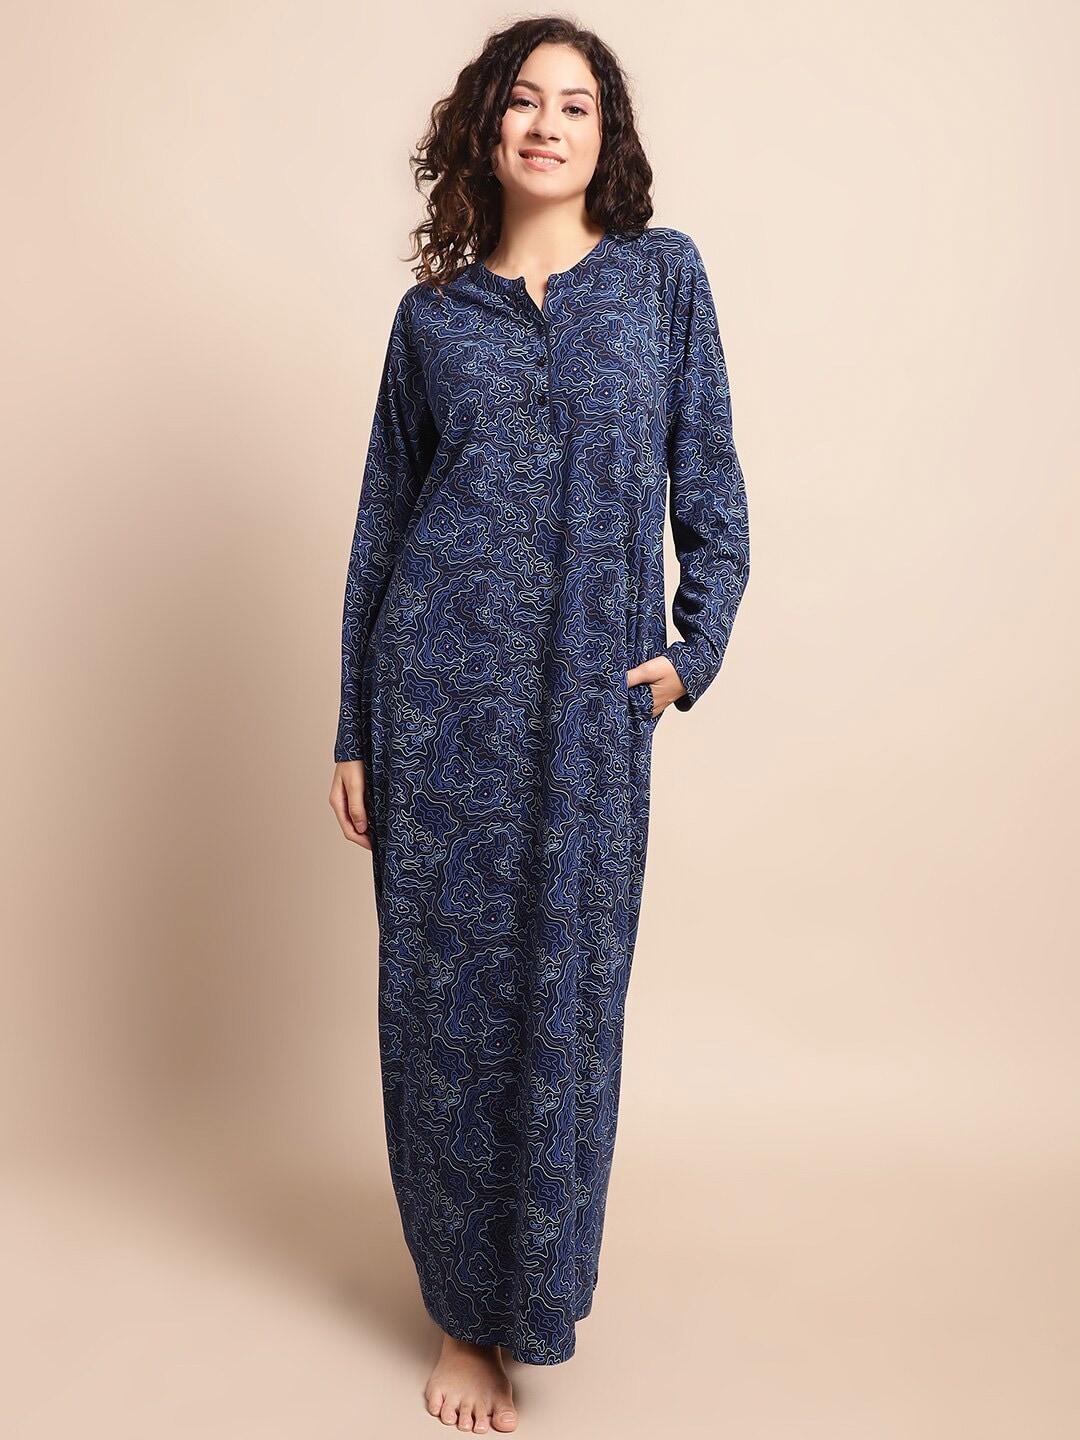 kanvin-navy-blue-abstract-printed-pure-cotton-maxi-nightdress